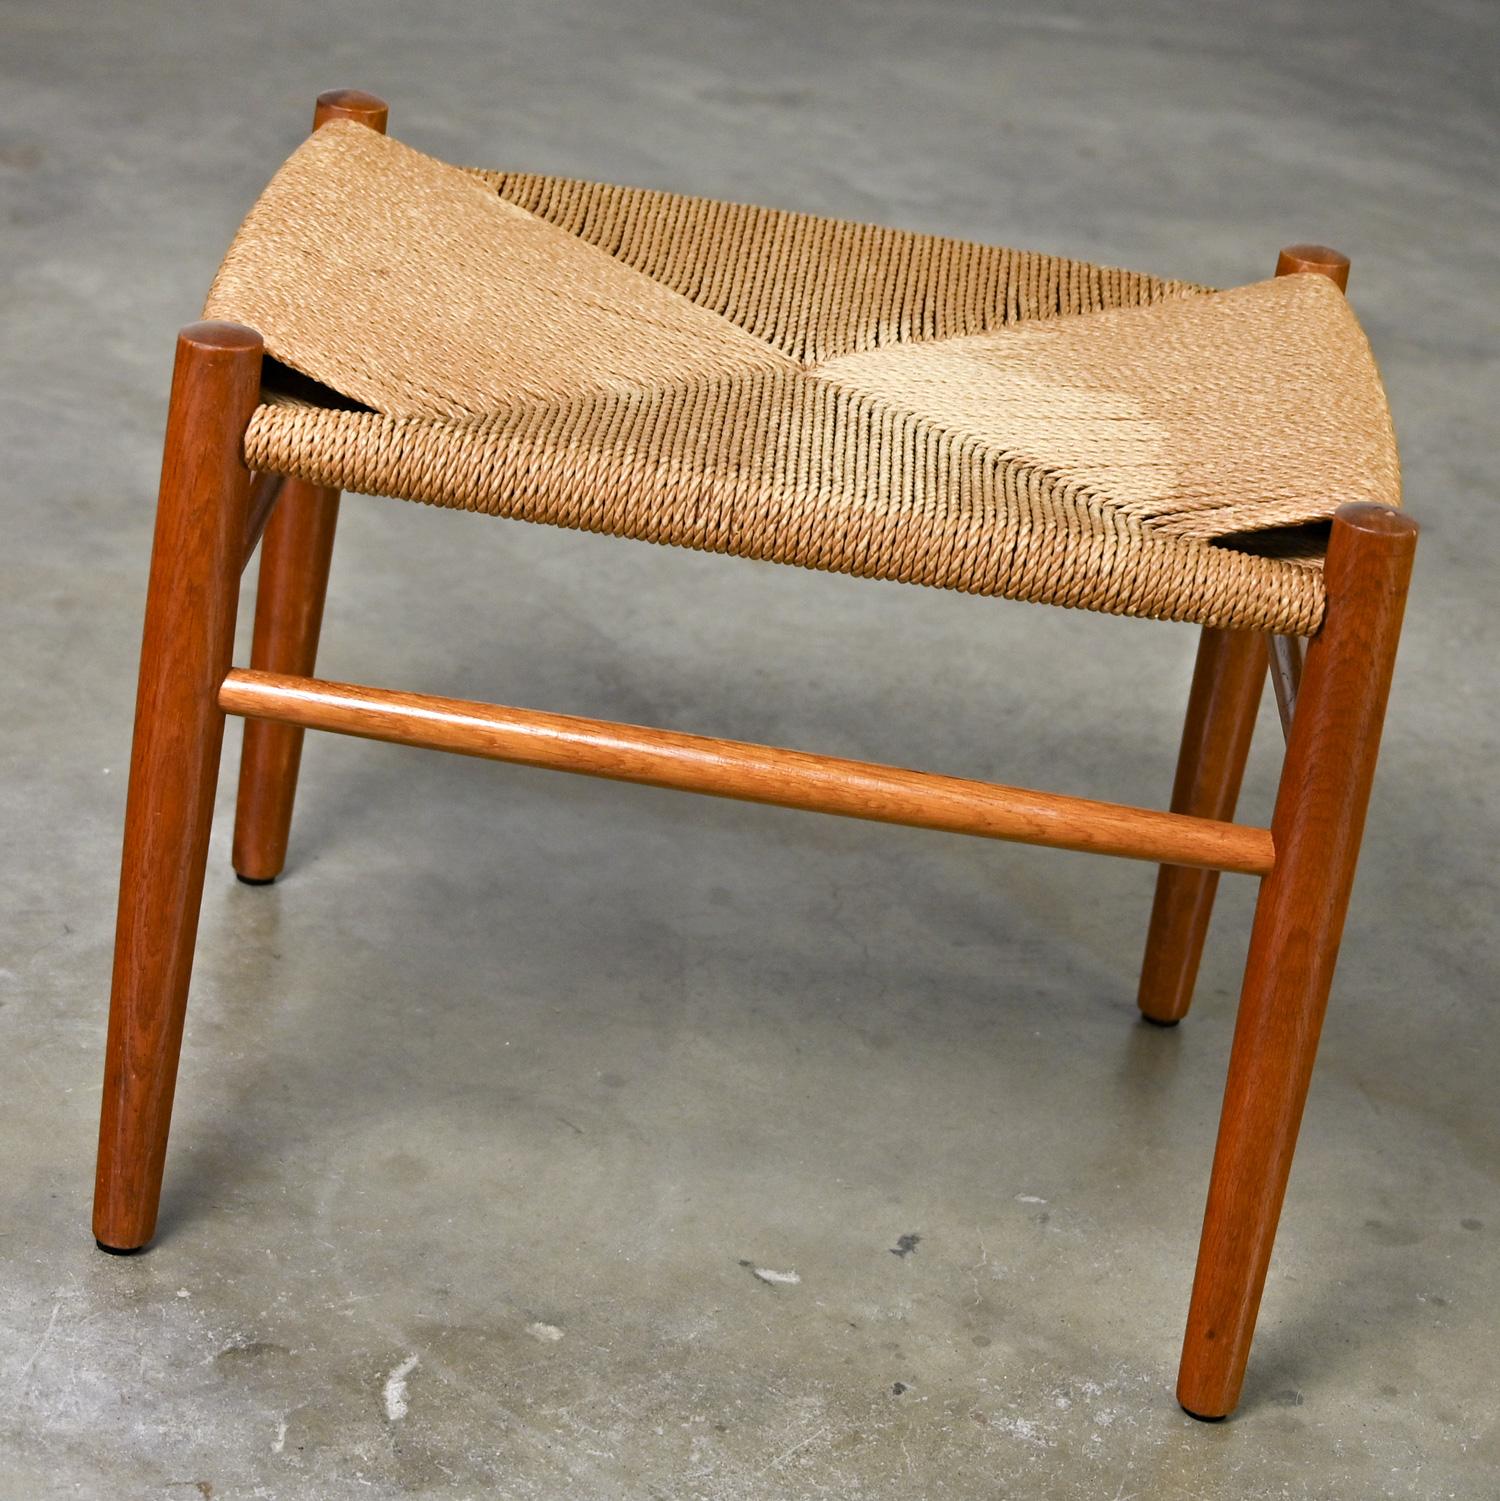 Mid-20th Century Scandinavian Modern Low Stool Teak with Natural Paper Cord Seat 3